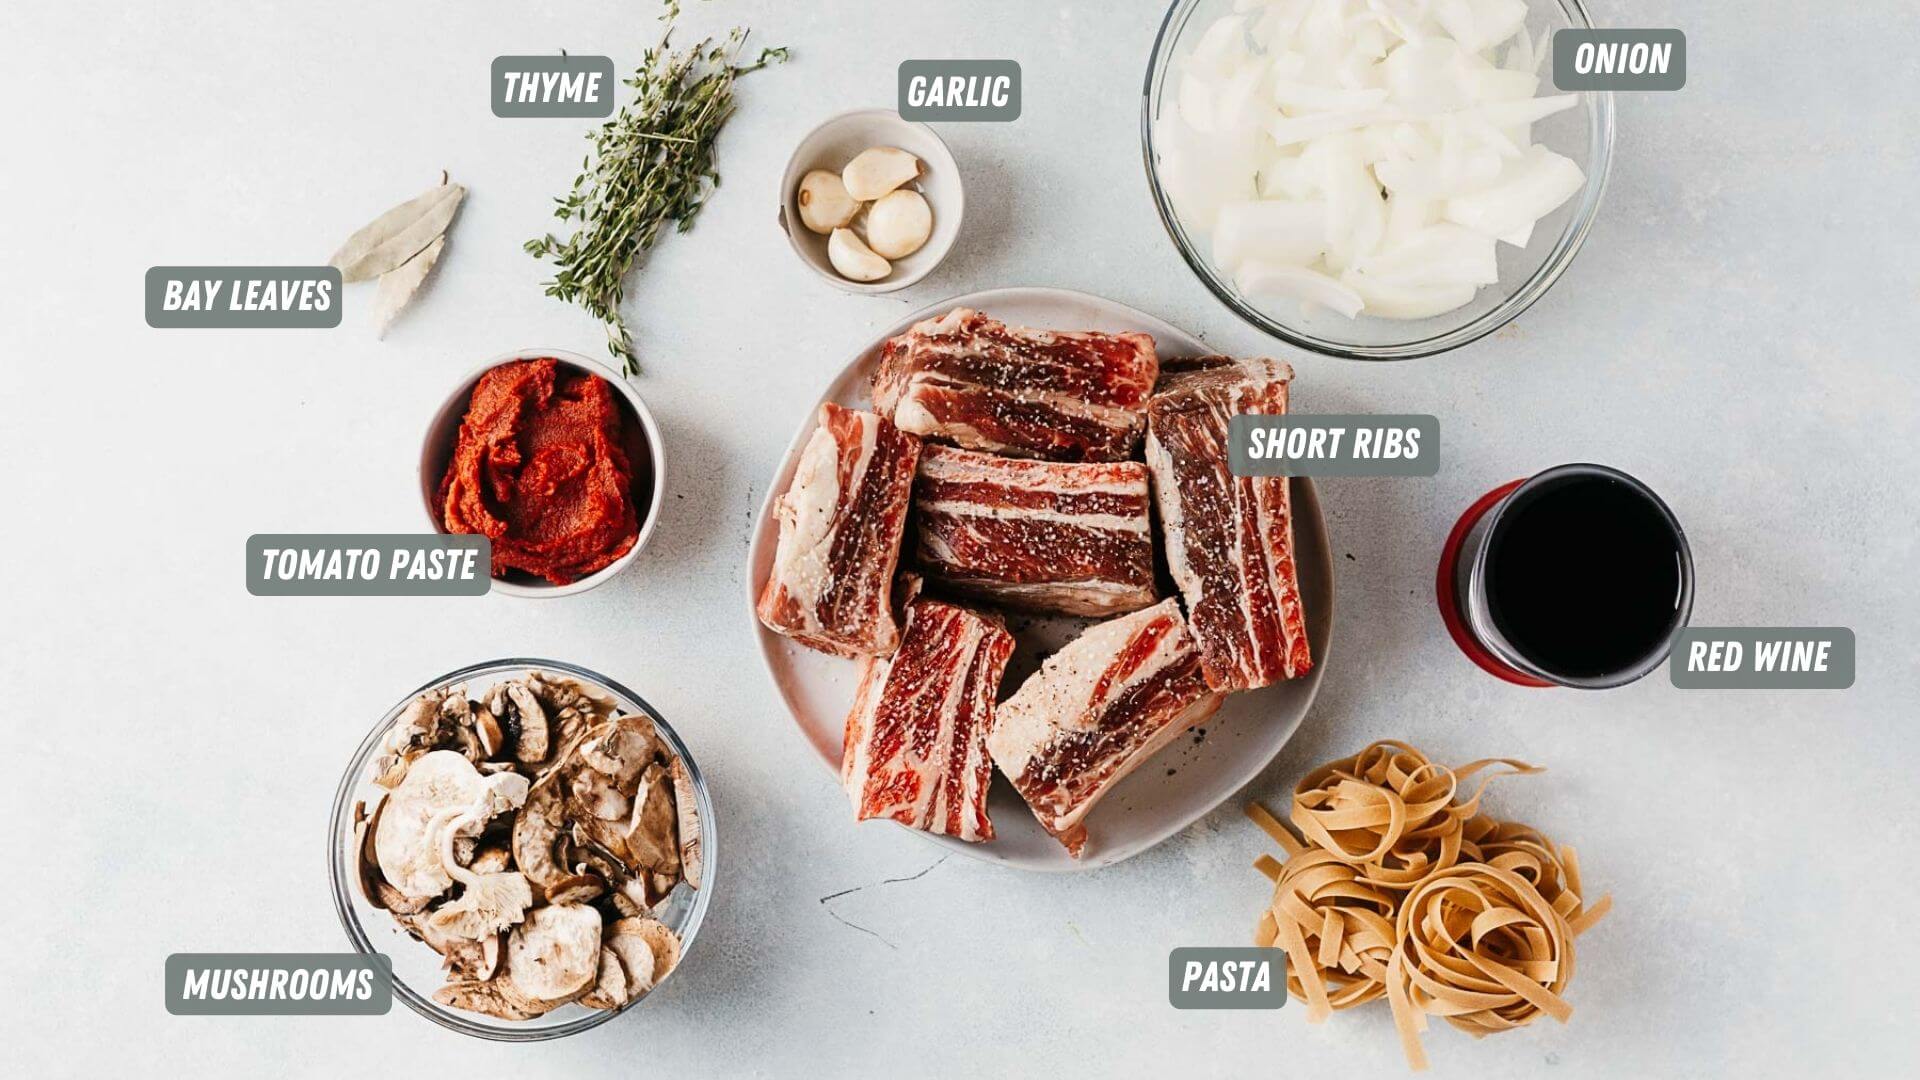 ingredients for braised short rib pasta measured out on the table